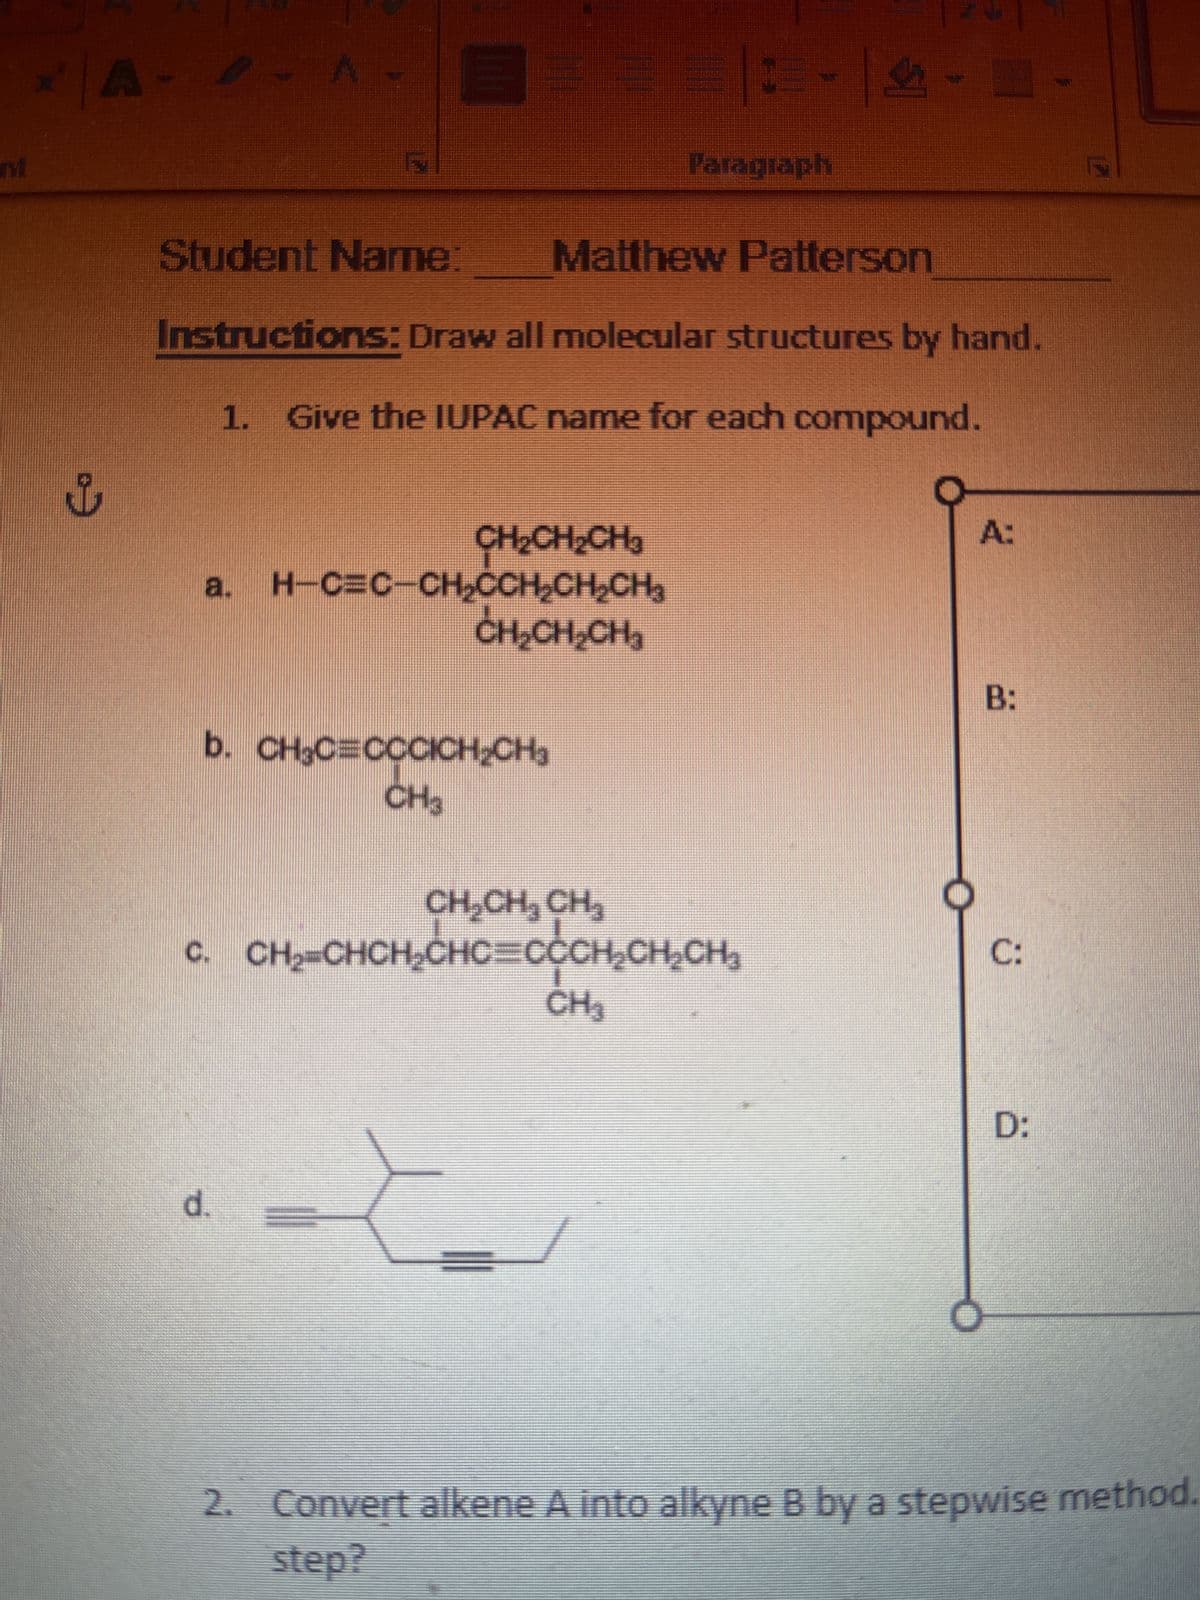 TM
A
ů
A
Student Name:
Matthew Patterson
Instructions: Draw all molecular structures by hand.
1. Give the IUPAC name for each compound.
CH₂CH₂CH₂
a. H¬C=C¬CH₂CCH₂CH₂CH₂
d.
CH₂CH₂CH₂
b. CH₂C=CCCICH₂CH₂
CH3
CH₂CH₂ CH₂
c. CH₂=CHCH₂CHC=CCCH₂CH₂CH₂
CE 4.
-|-
Paragraph
CH₂
A:
B:
C:
D:
2. Convert alkene A into alkyne B by a stepwise method.
step?